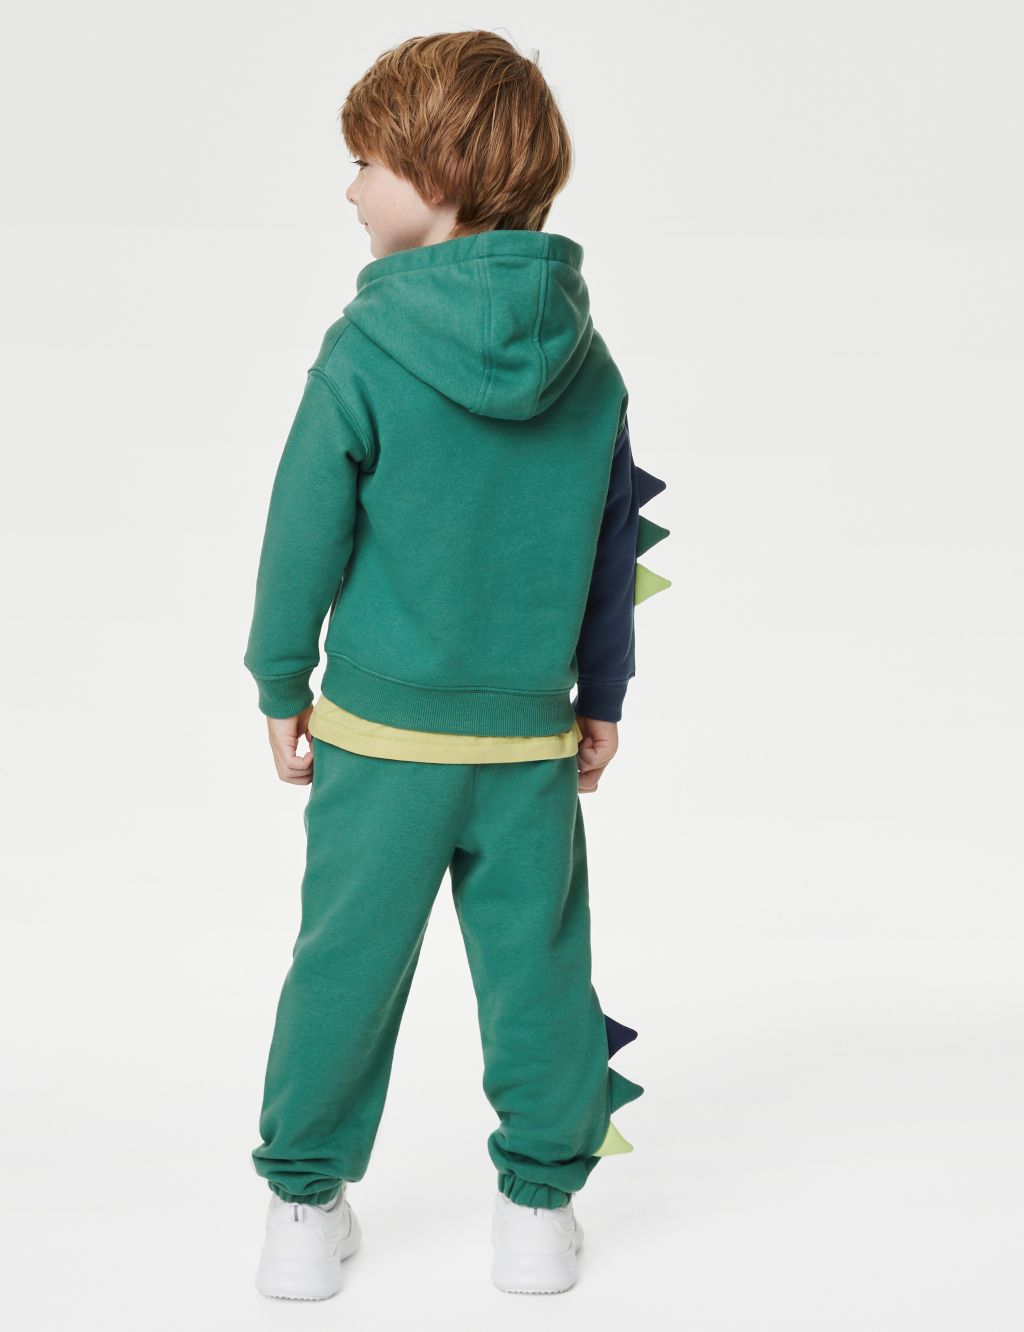 2pc Cotton Rich Dinosaur Outfit (2-8 Yrs) image 4